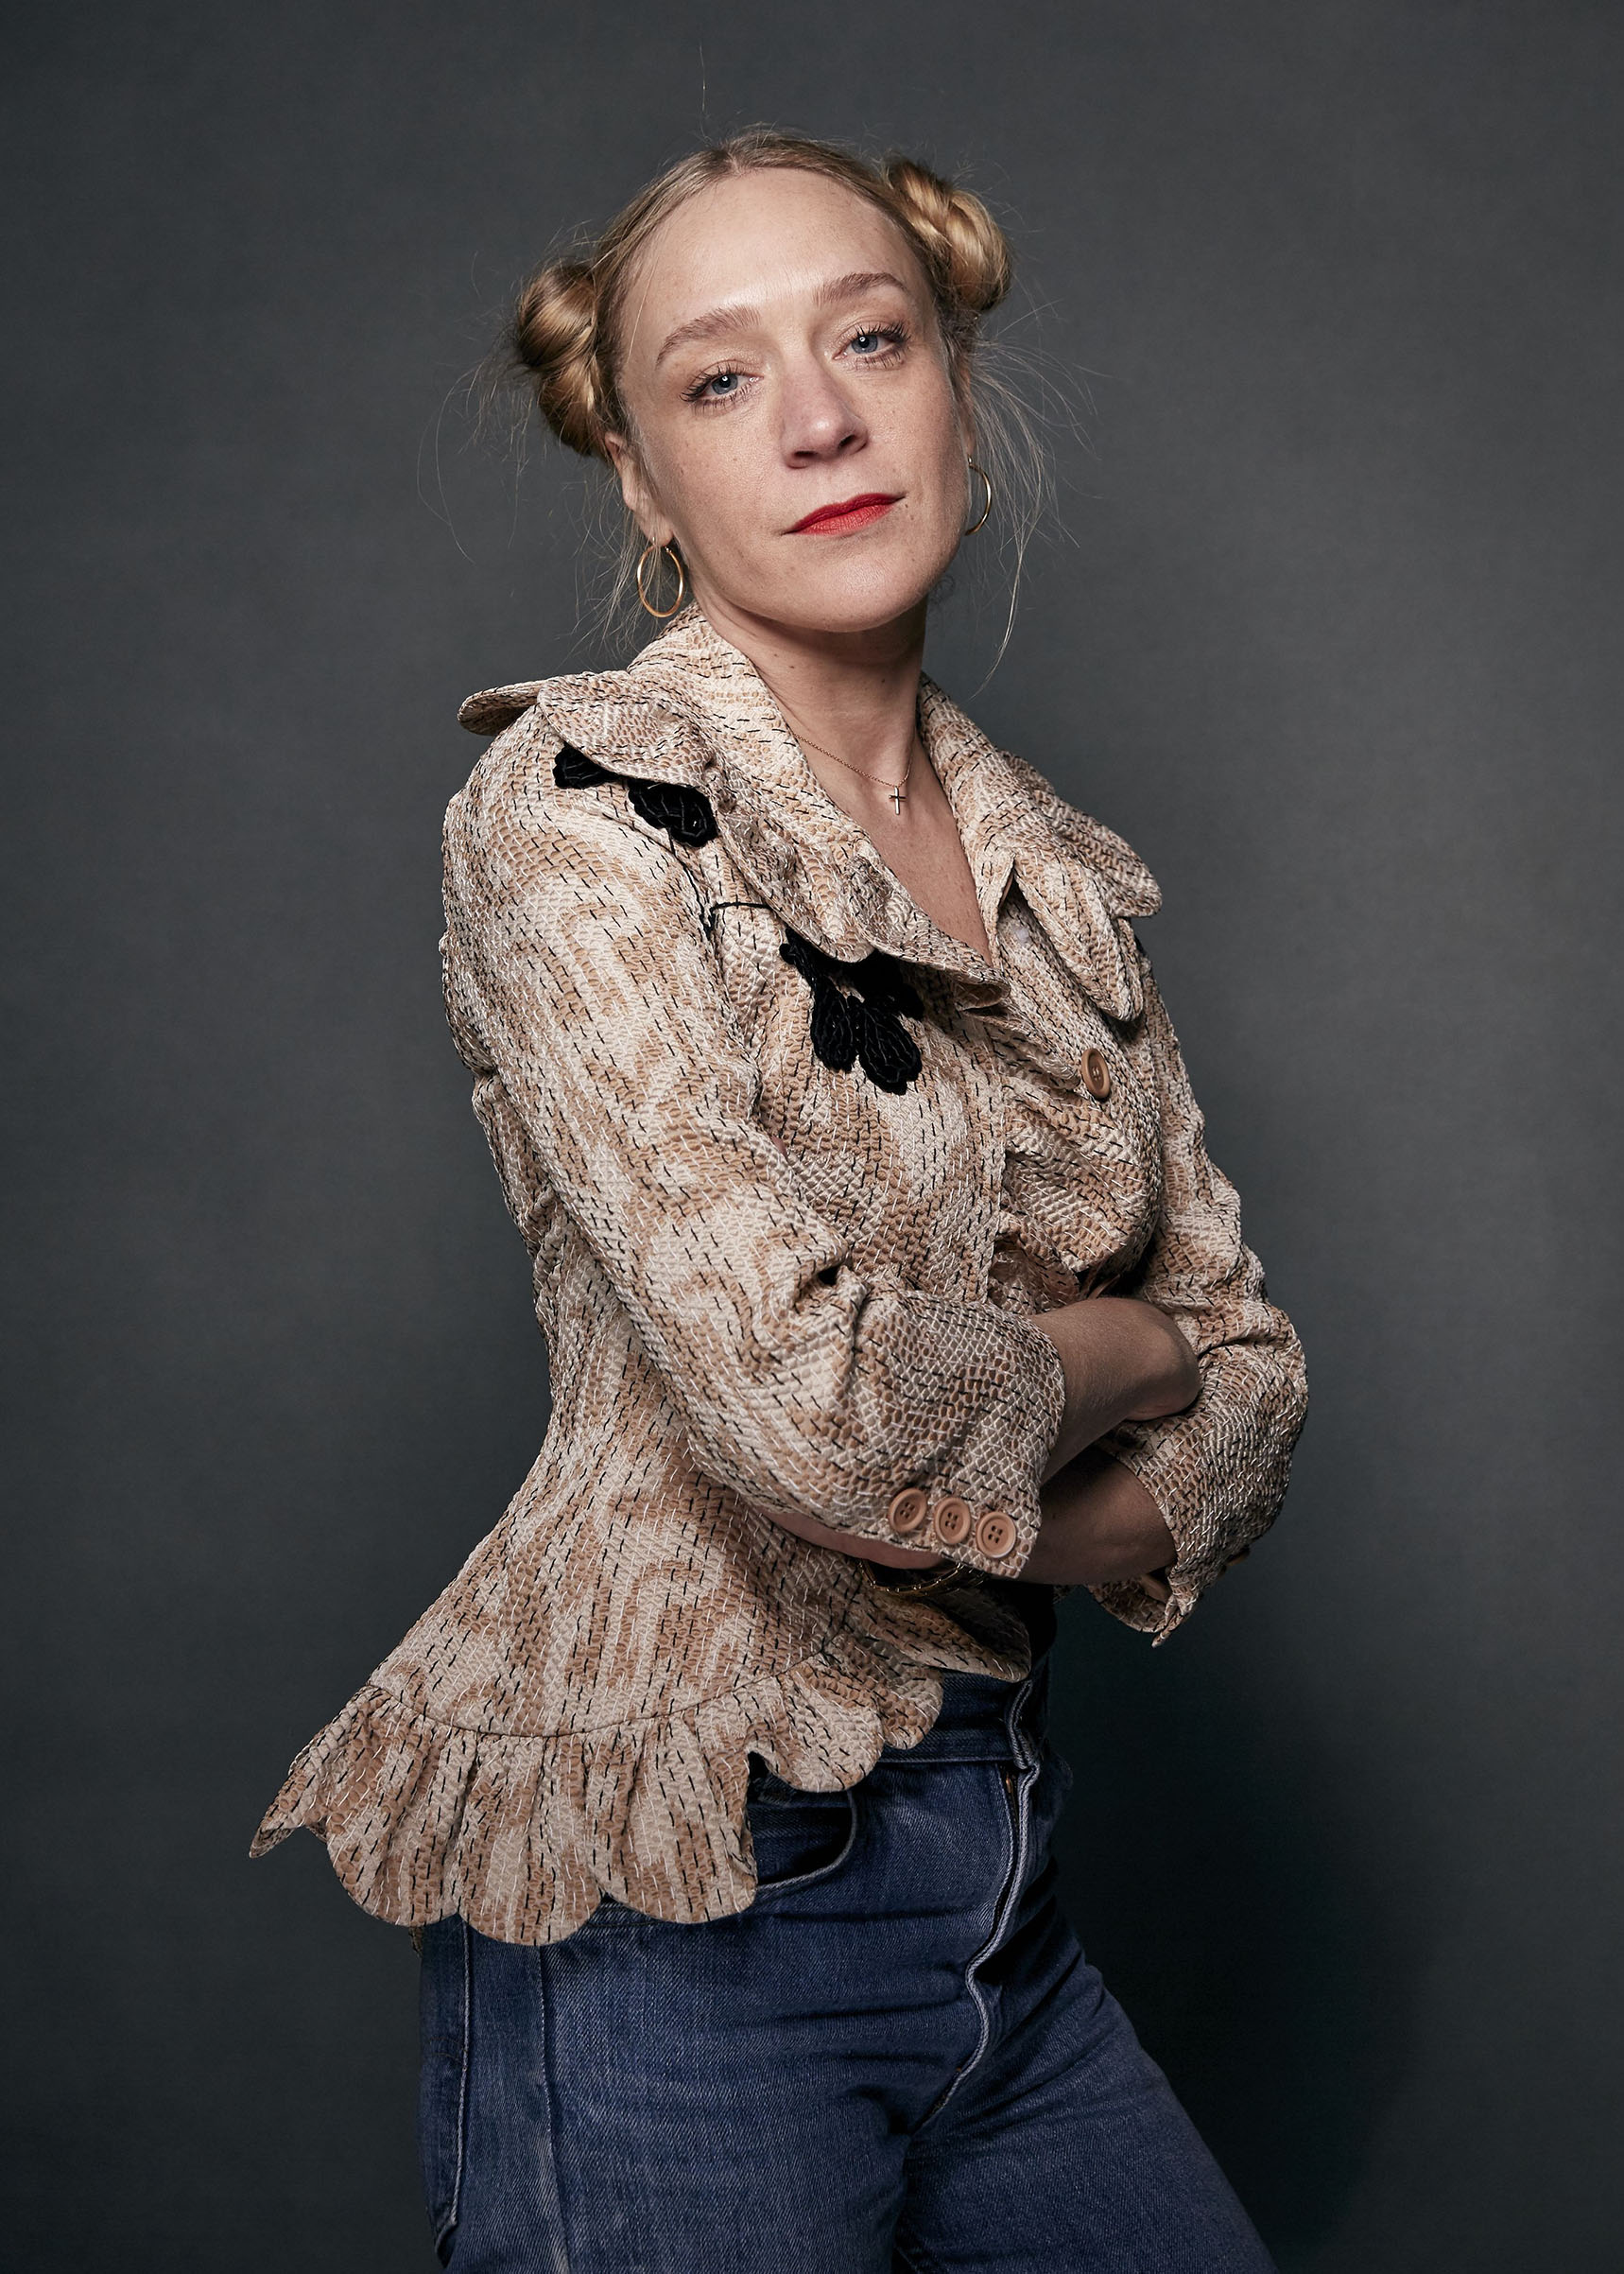 Chloe Sevigny poses for a portrait during the Sundance Film Festival, in Park City, Utah on Jan 19, 2018. (Taylor Jewell—Invision/AP/Shutterstock)